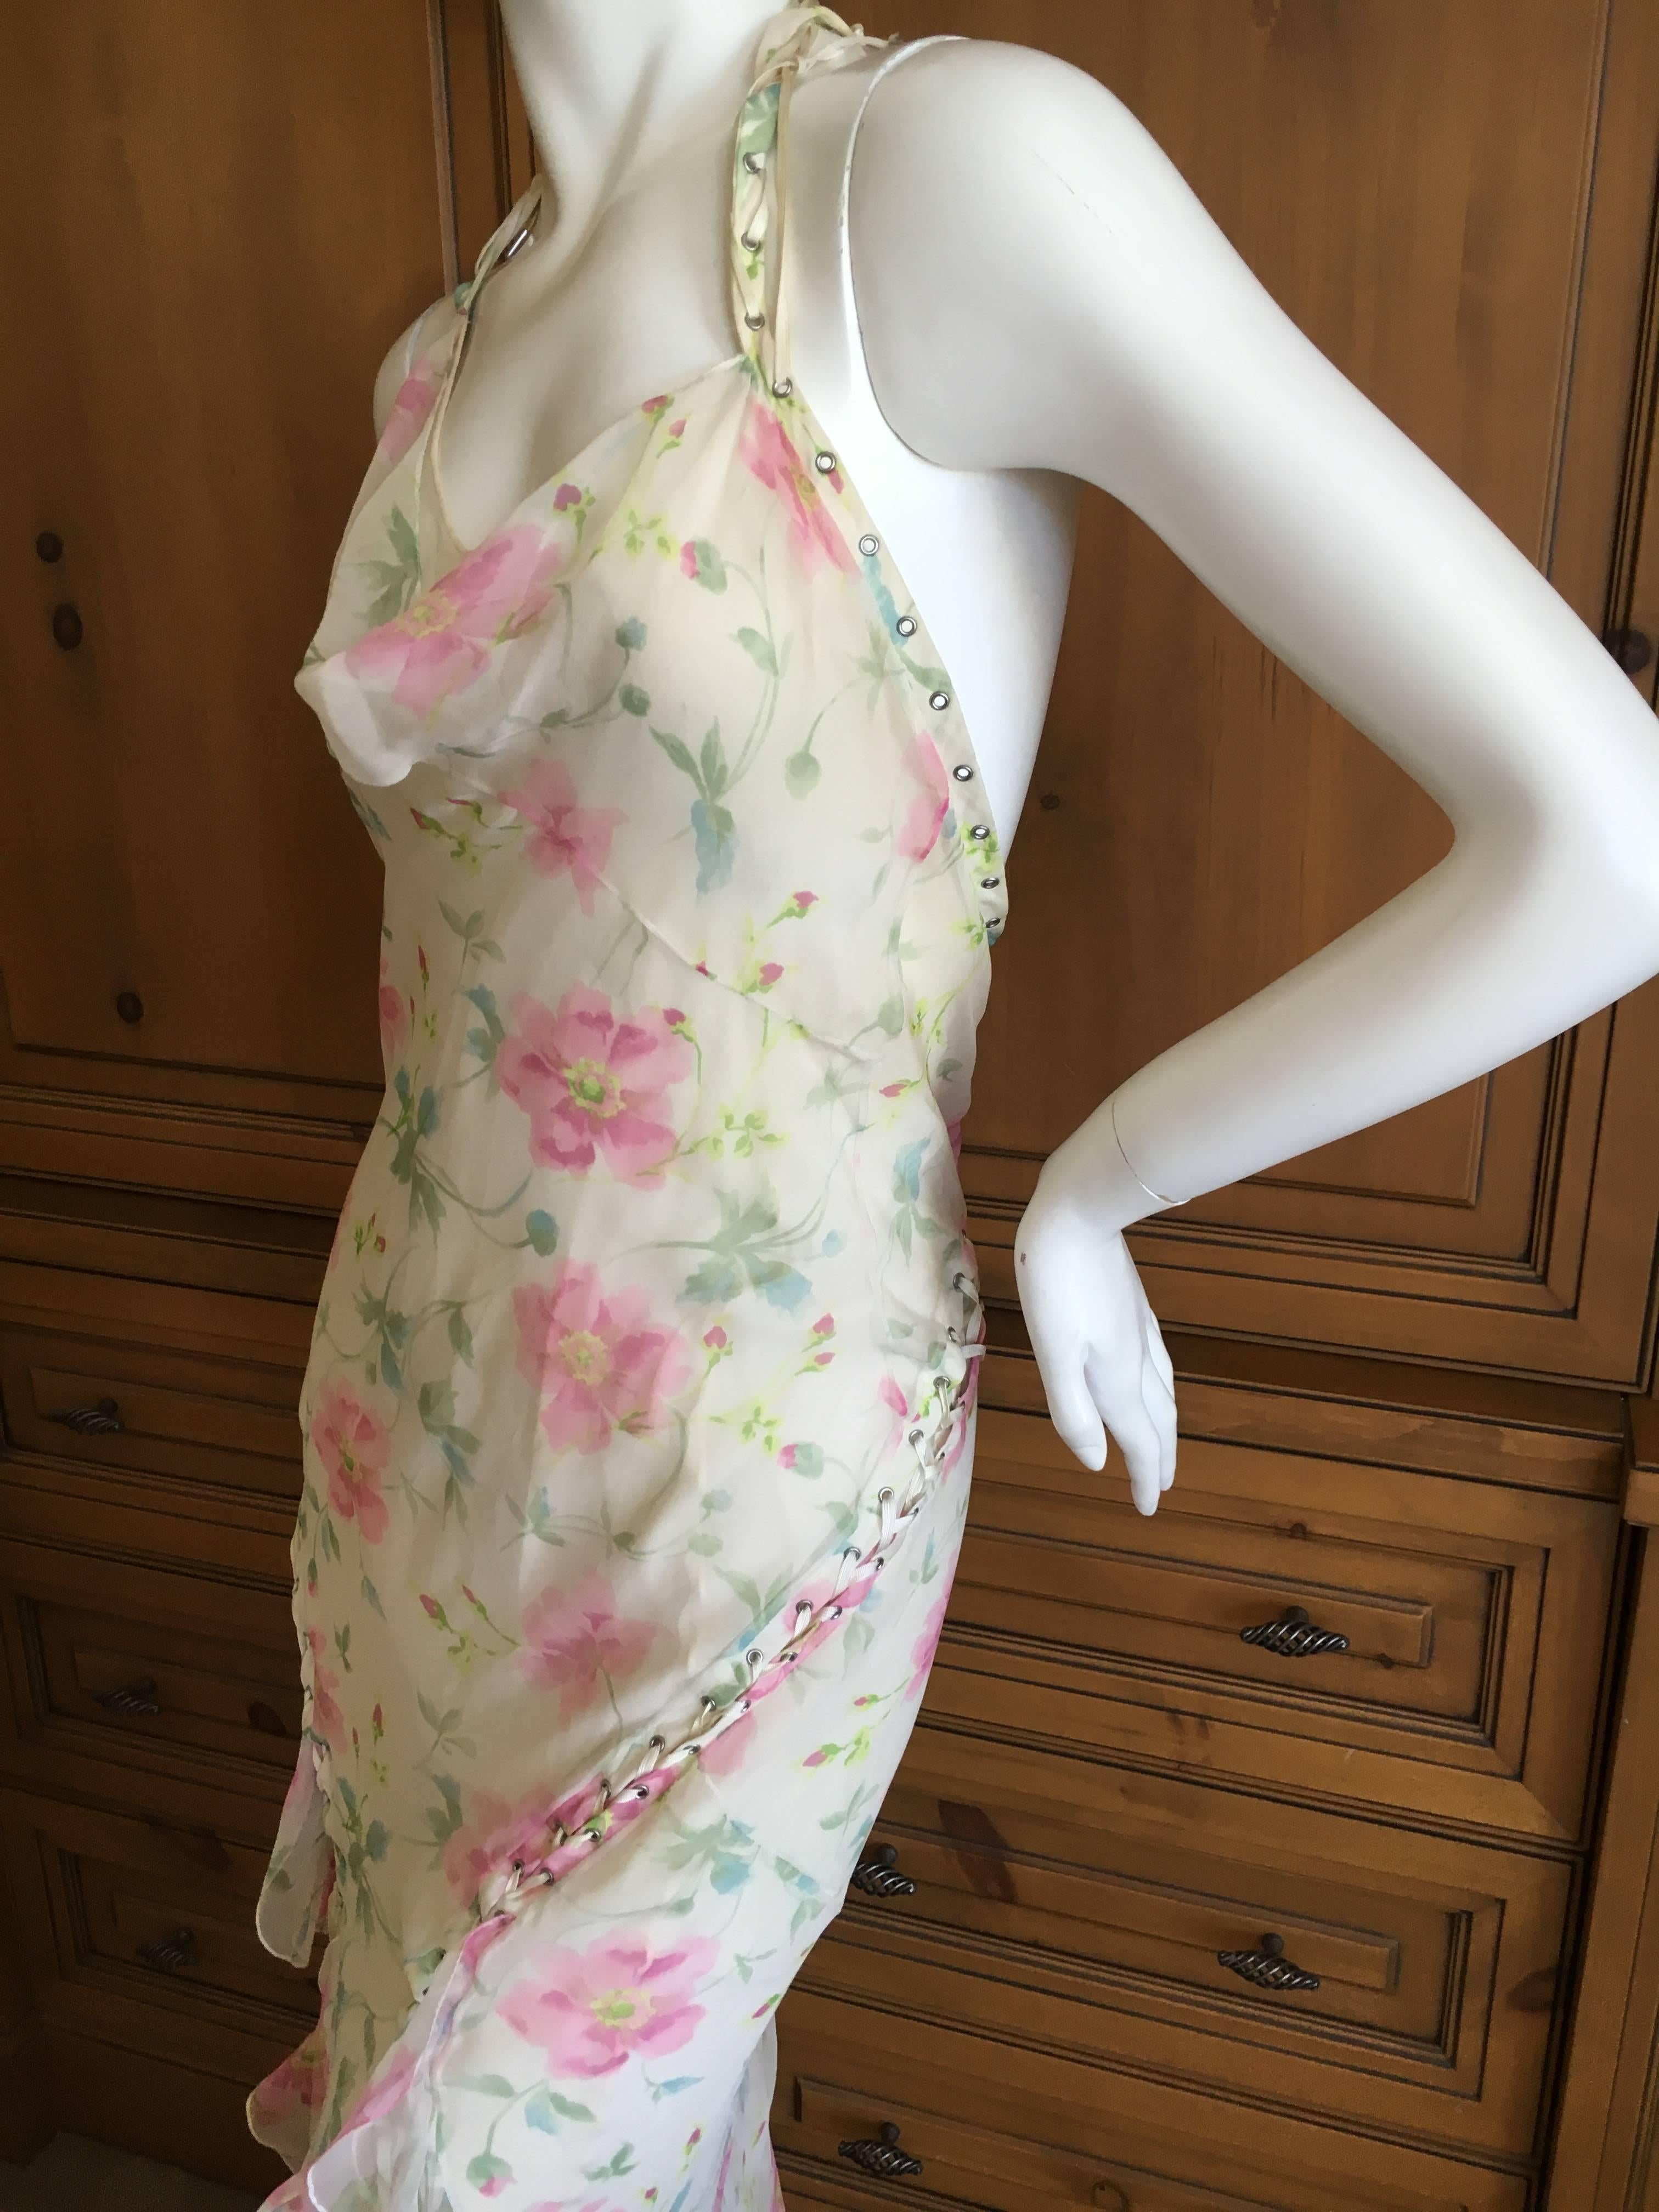 Dior by Galliano Sweet Ruffled Silk Floral Dress with Corset Lace Details.
SIze 40